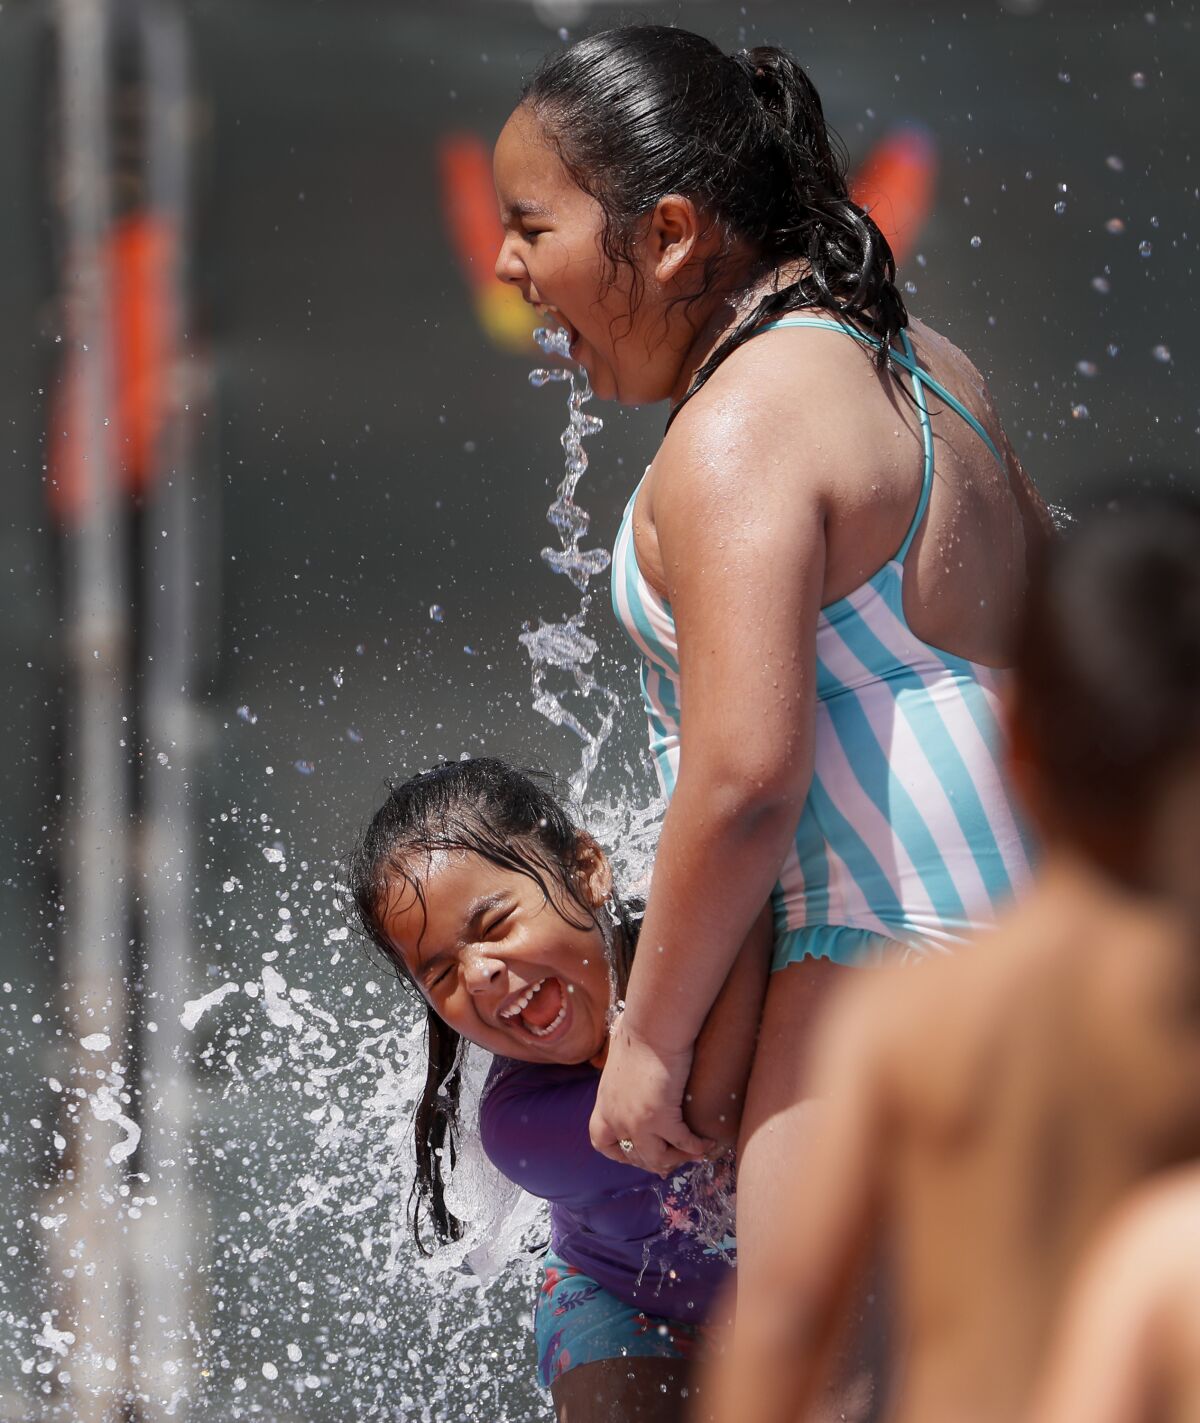 Two young girls laugh as they stand in a spray of water at a play area